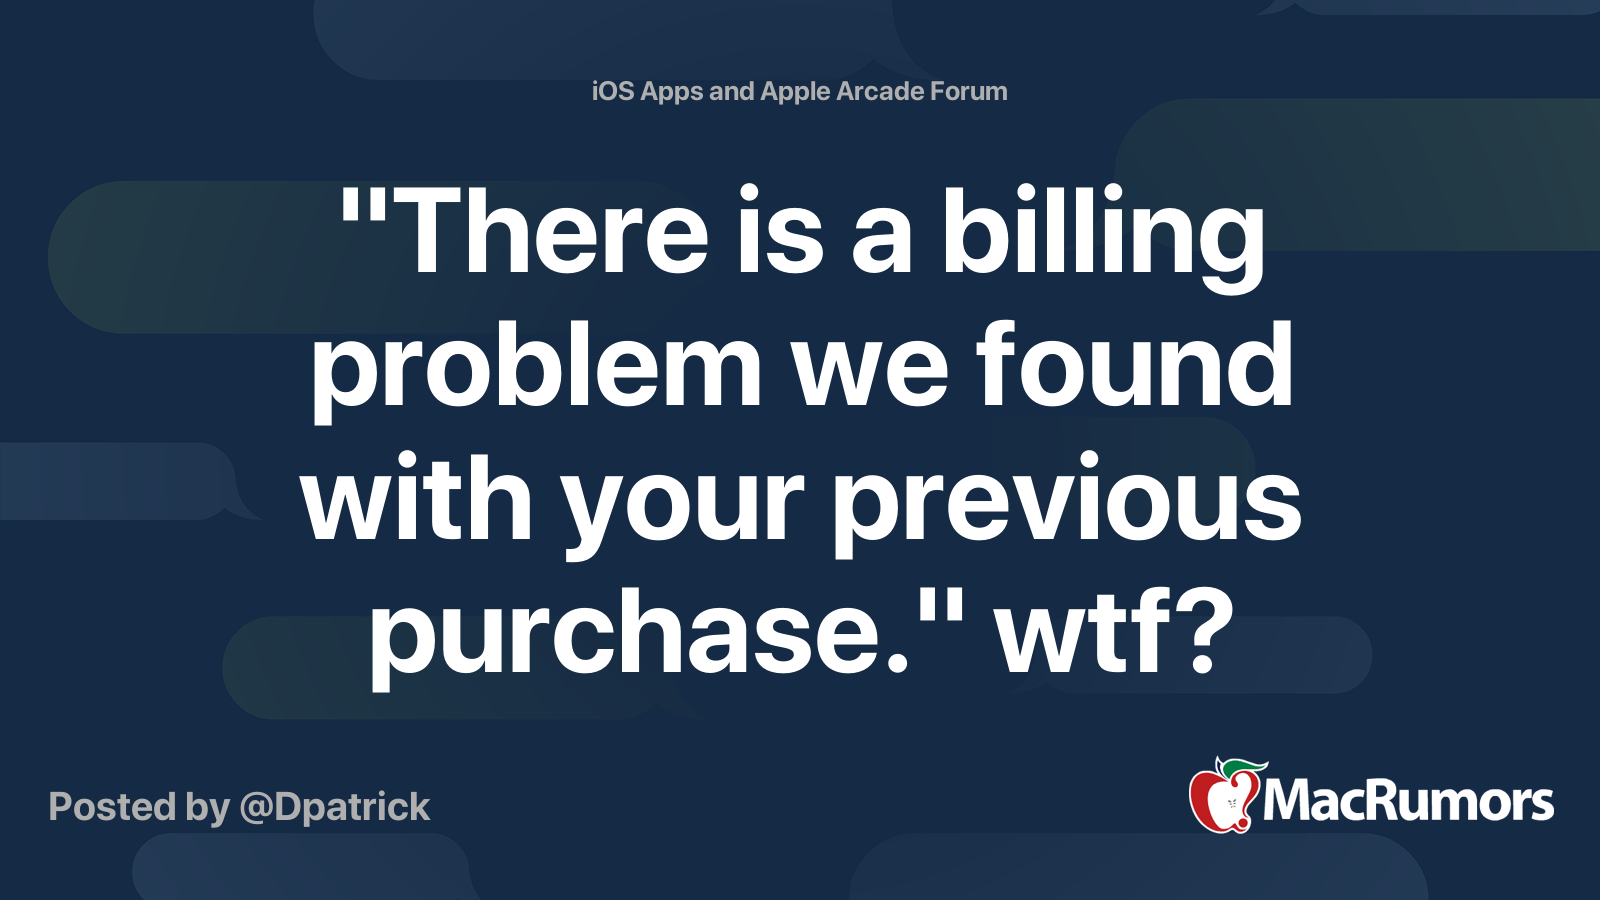 "There is a billing problem we found with your previous purchase." wtf